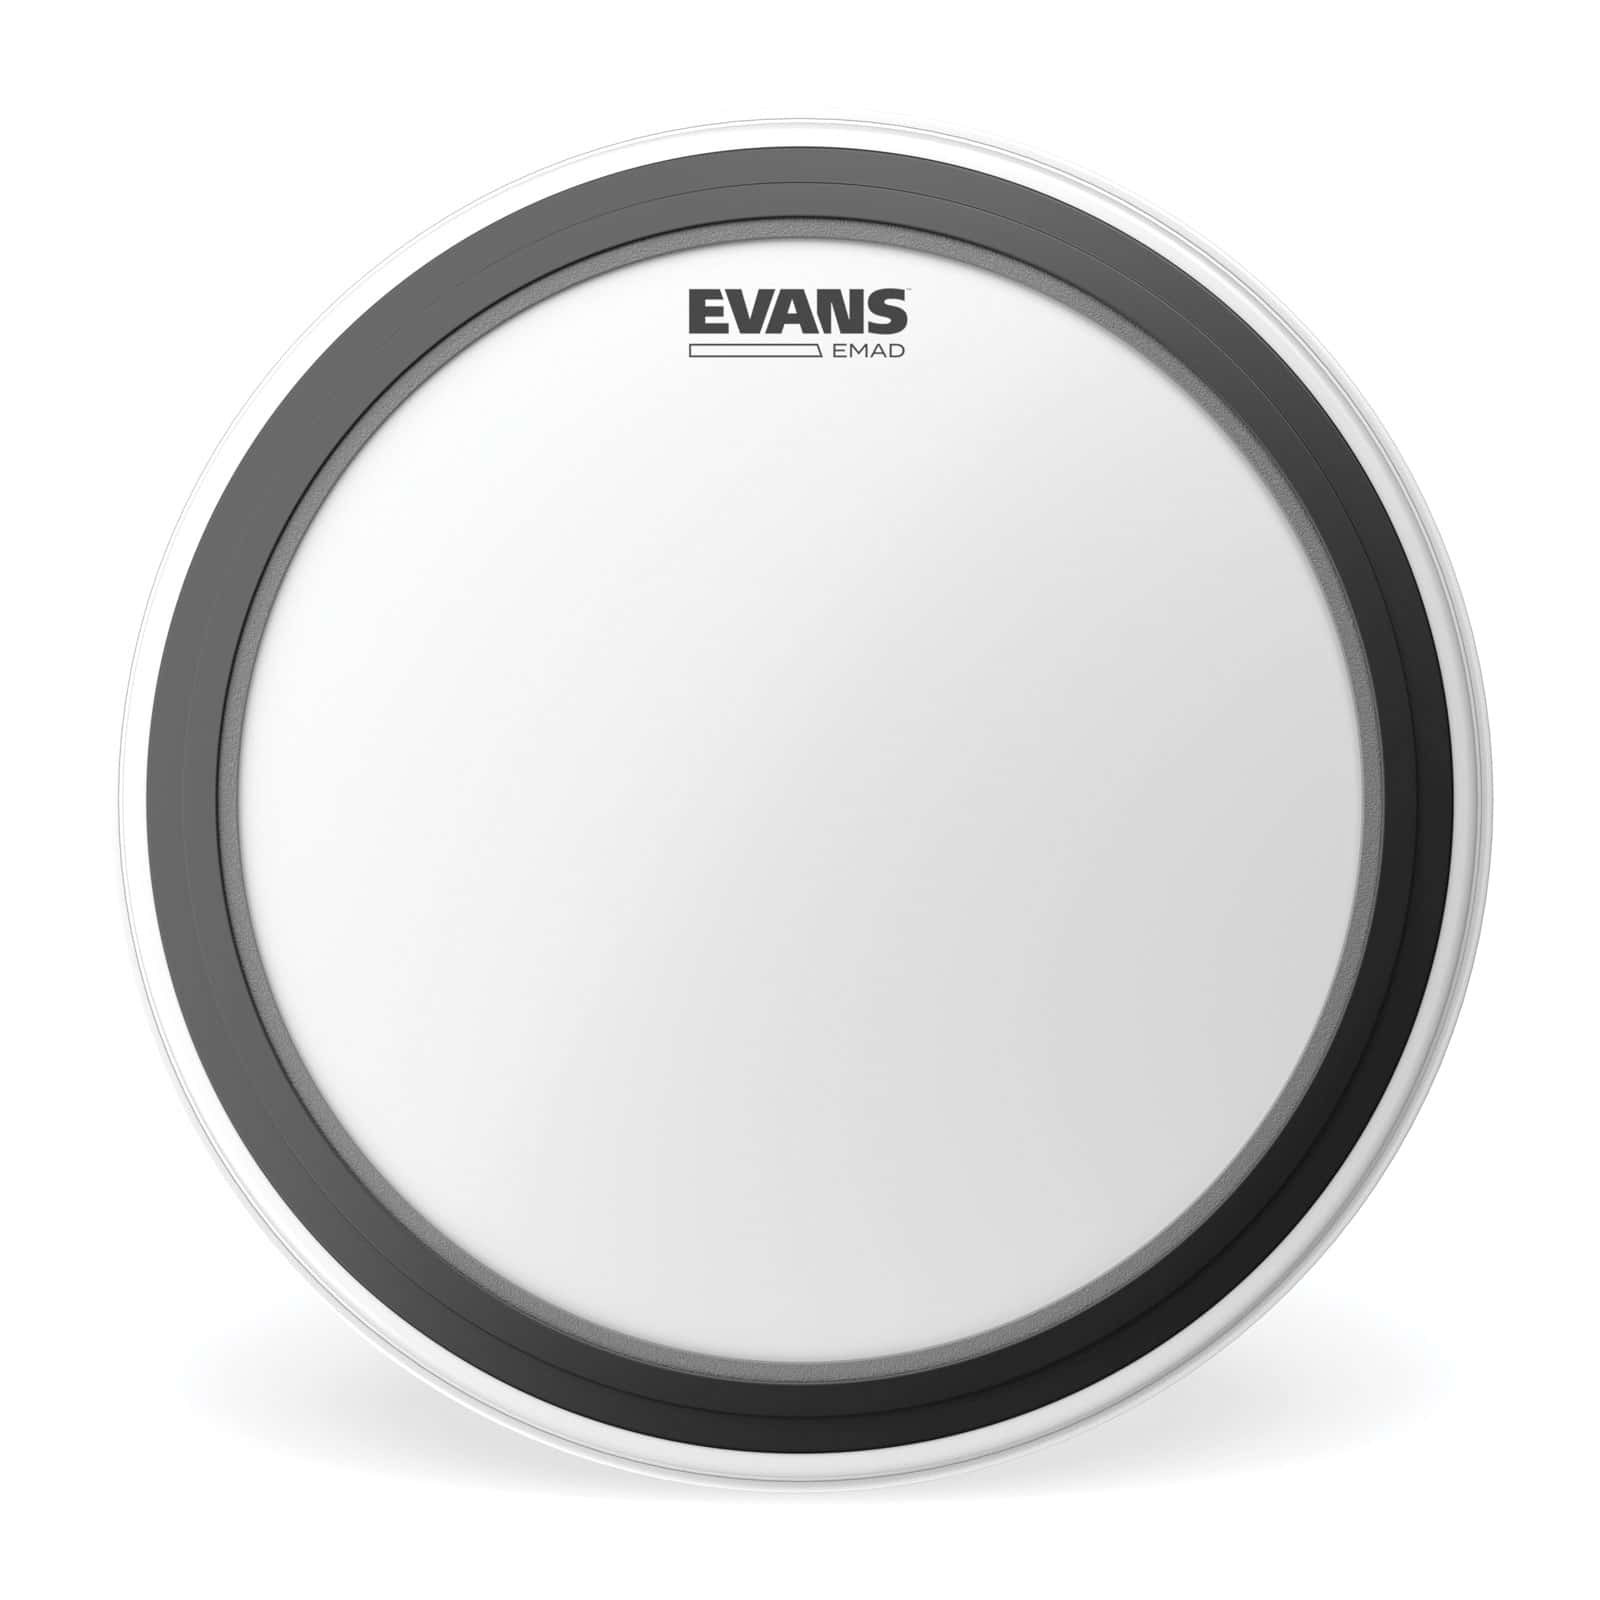 EVANS BD20EMADCW - PEAU EMAD COATED SABLEE 20